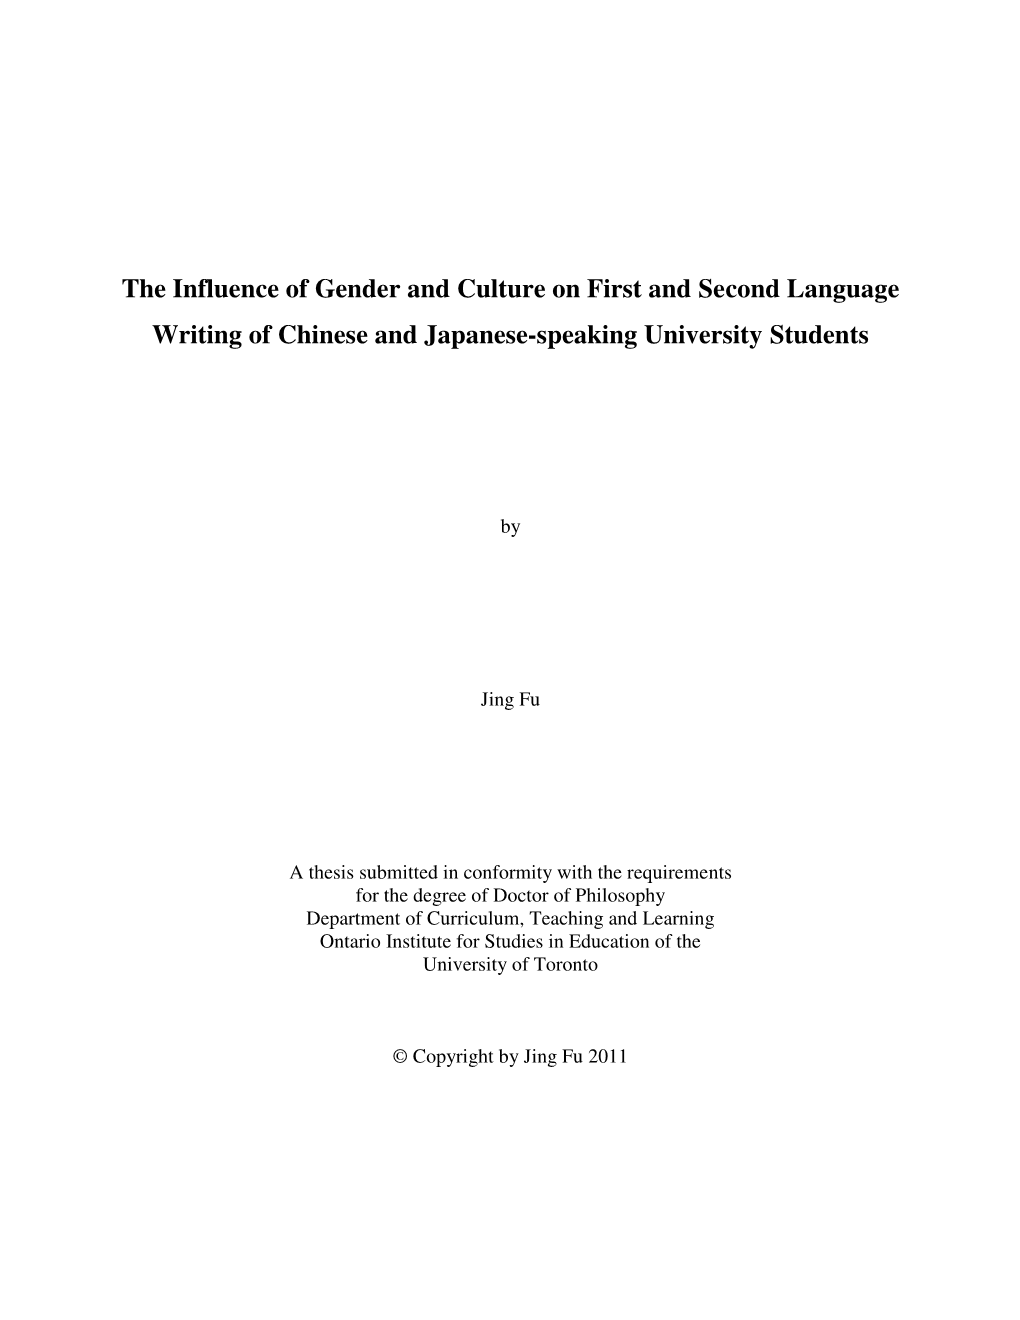 The Influence of Gender and Culture on First and Second Language Writing of Chinese and Japanese-Speaking University Students